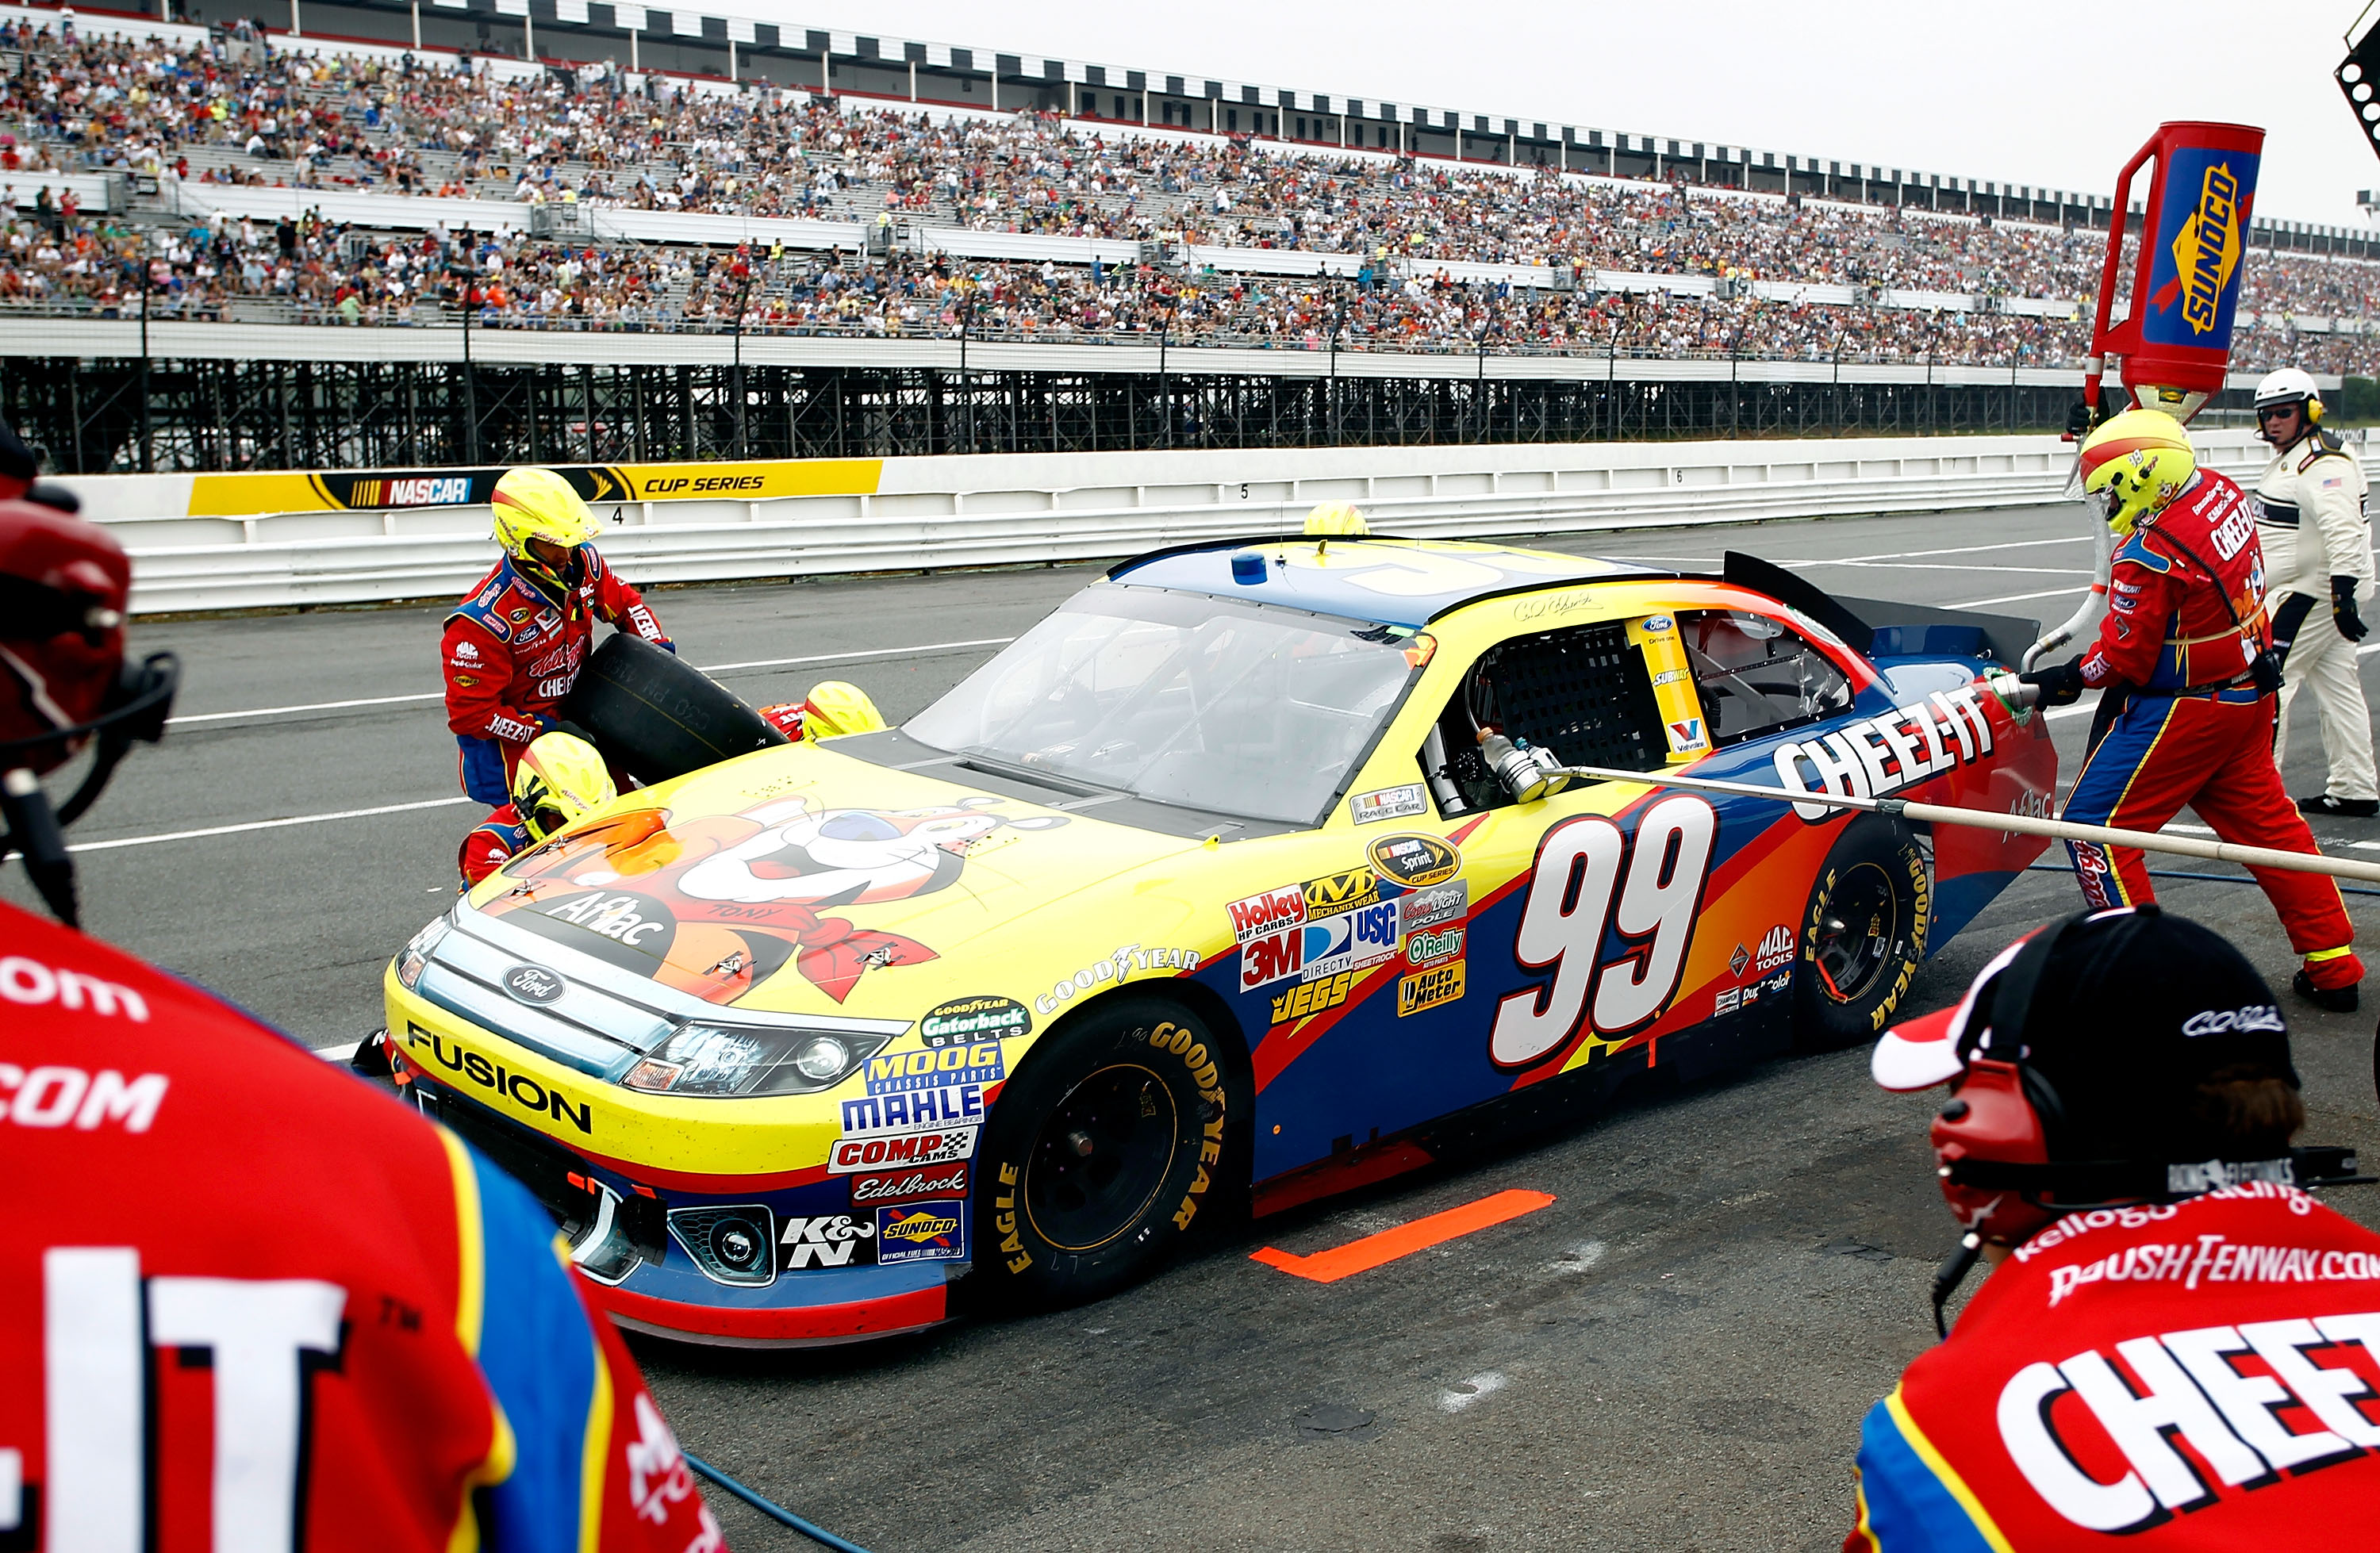 LONG POND, PA - JUNE 12: Carl Edwards, driver of the #99 Kellogg's Ford, comes in for a pit stop during the NASCAR Sprint Cup Series 5-Hour Energy 500 at Pocono Raceway on June 12, 2011 in Long Pond, Pennsylvania.  (Photo by Jeff Zelevansky/Getty Images f